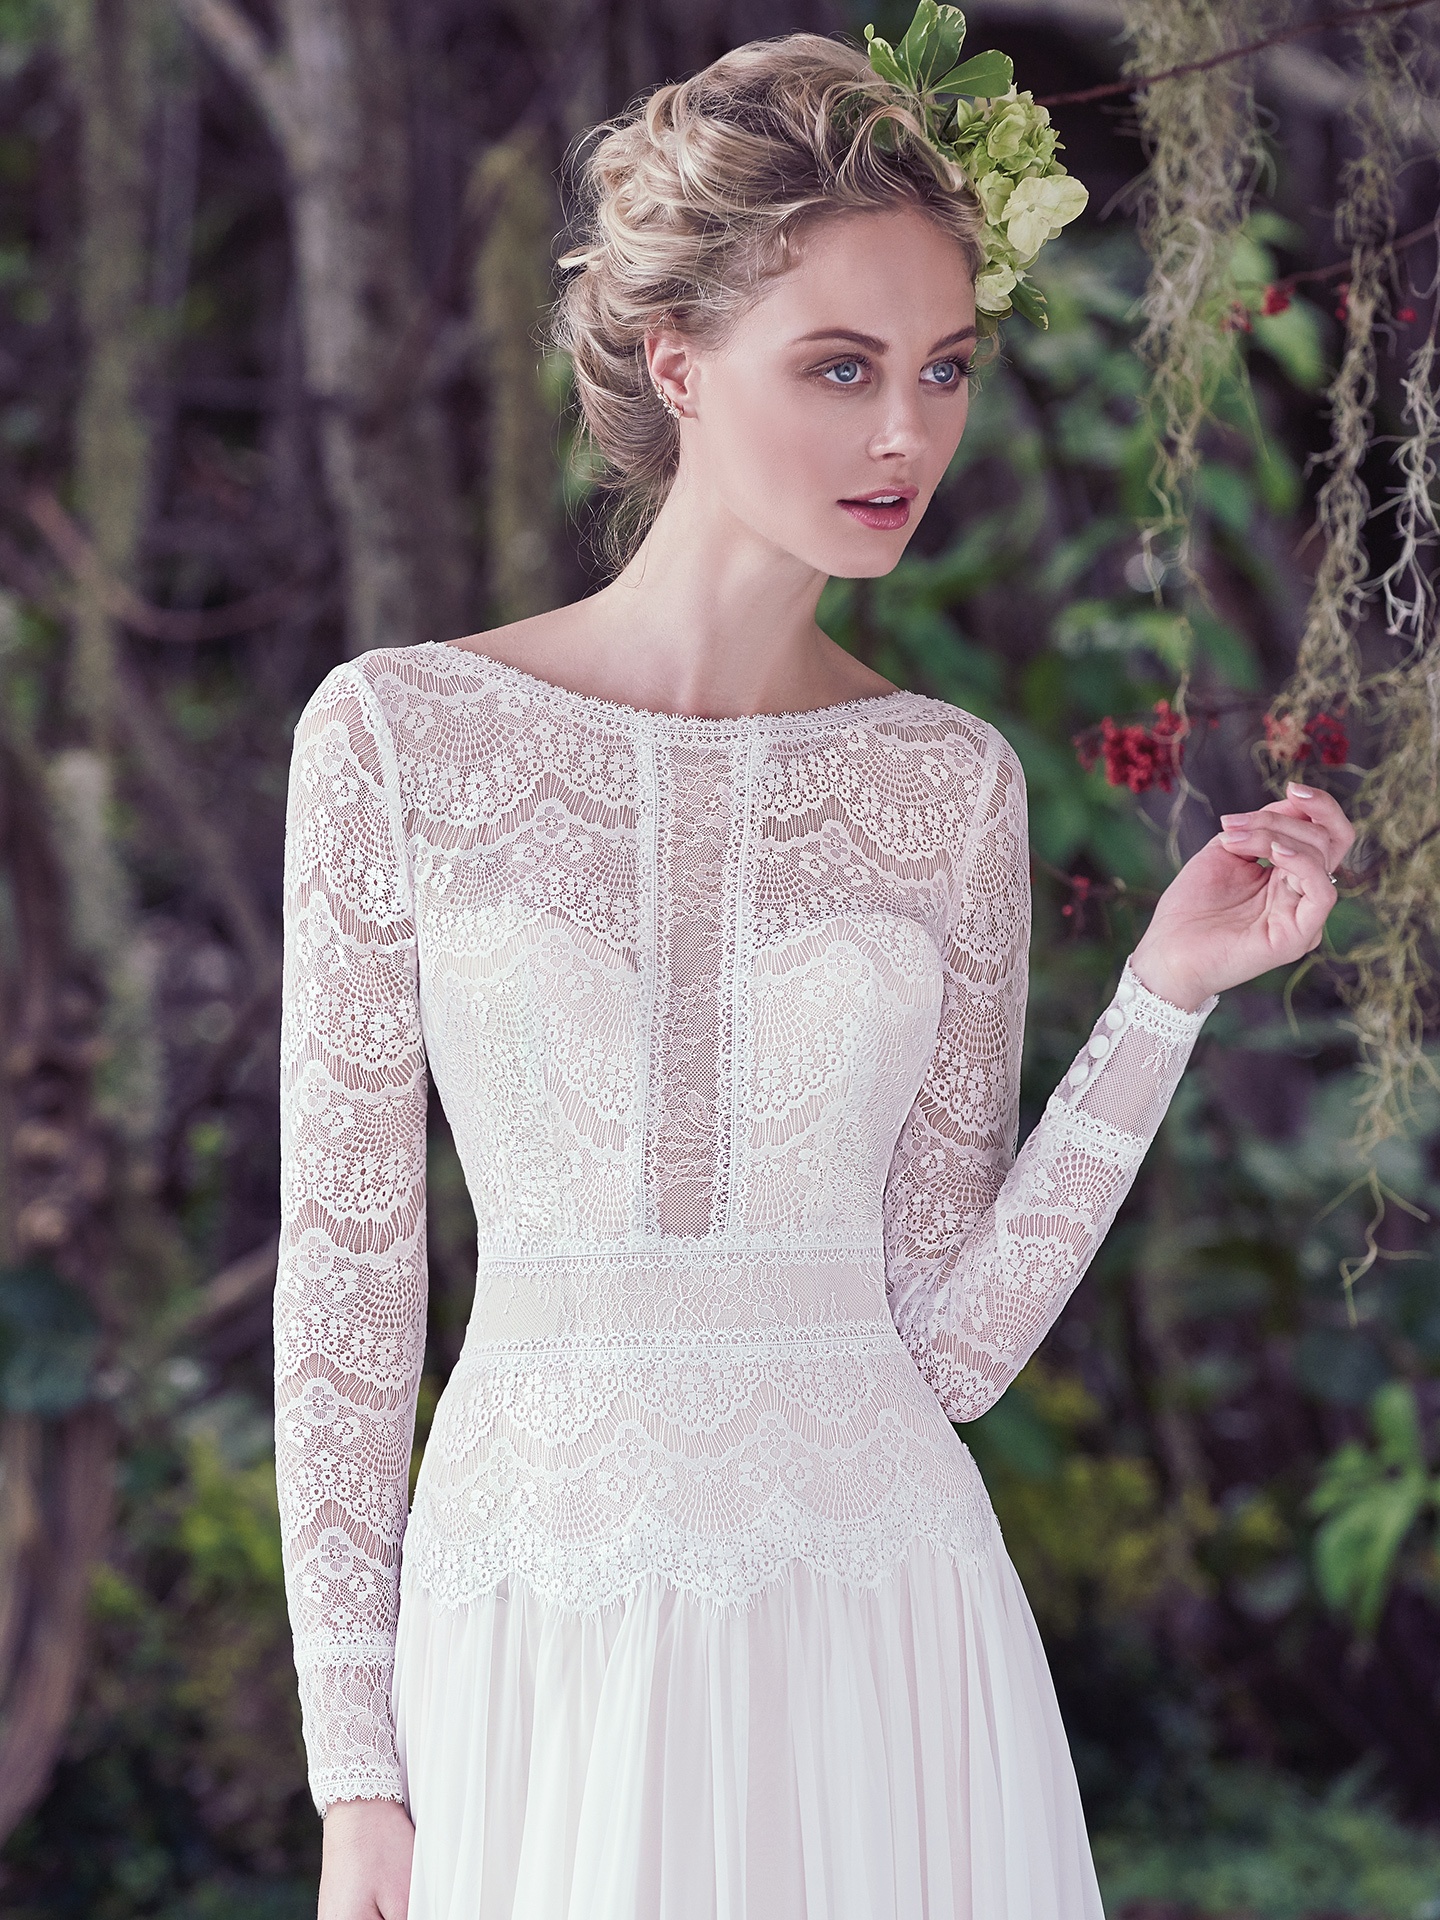  Seven Types of Lace To Know When Shopping For A Wedding Dress: Maggie Sottero's Lace Library. Deirdre wedding dress by Maggie Sottero